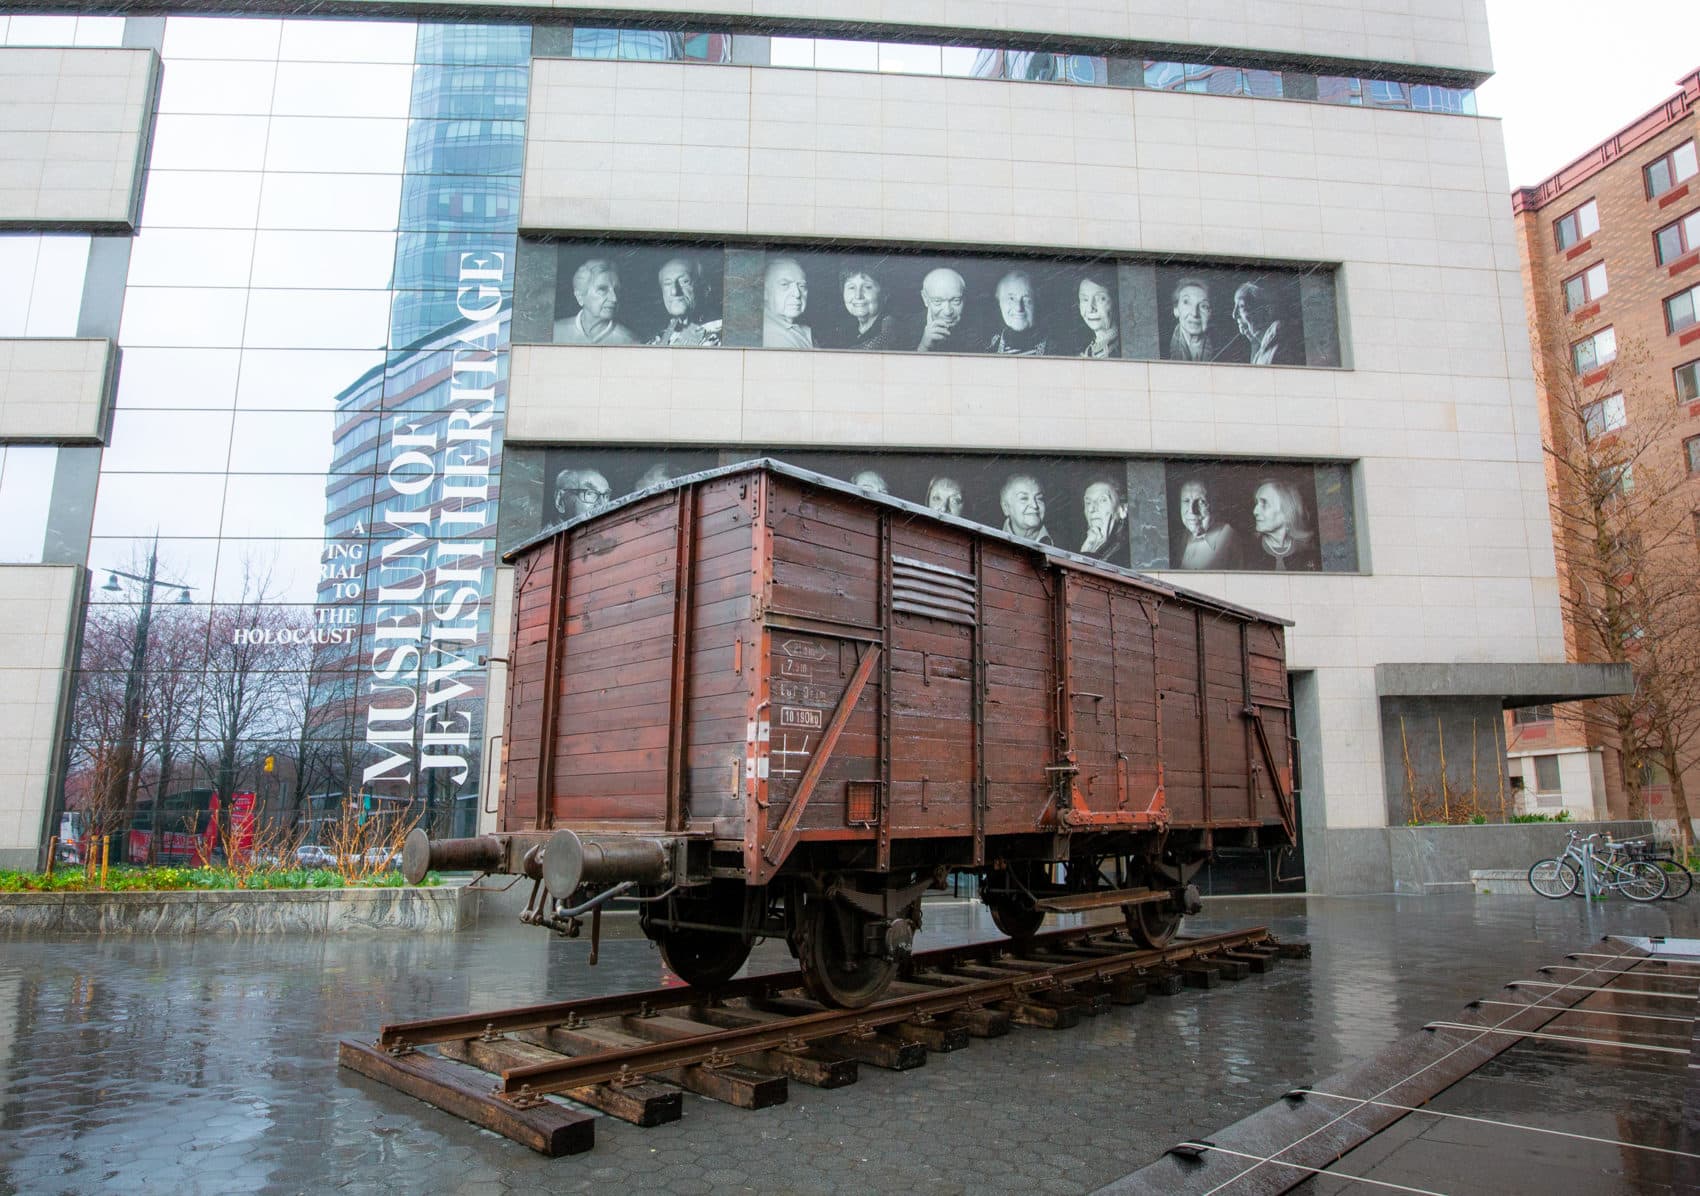 A German-made World War II-era freight car outside the Museum of Jewish Heritage. Approximately 80 people were crammed in one of these cars when they were deported to Auschwitz. (Courtesy Museum of Jewish Heritage/John Halpern)